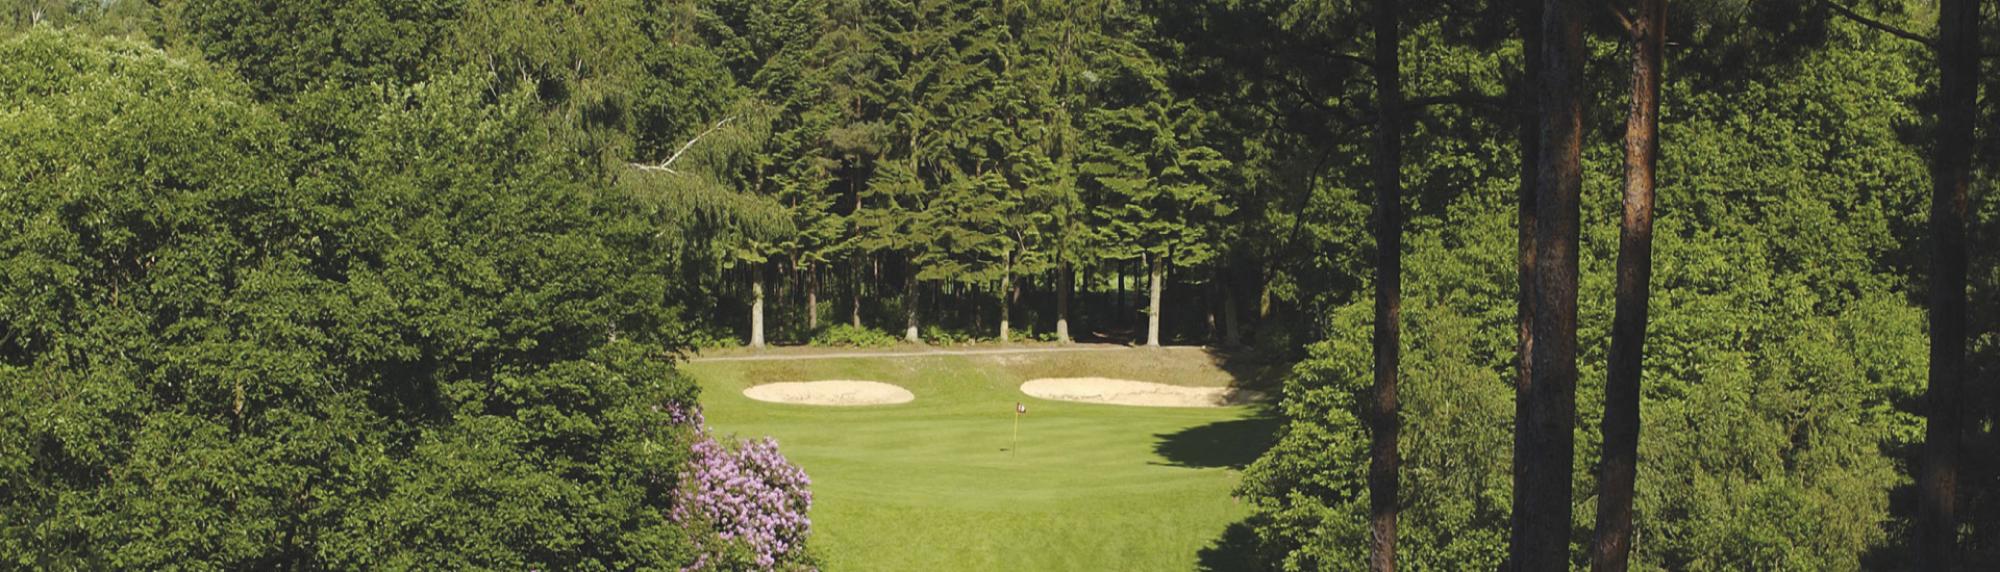 View Golf du Champ de Bataille's beautiful golf course situated in marvelous Normandy.